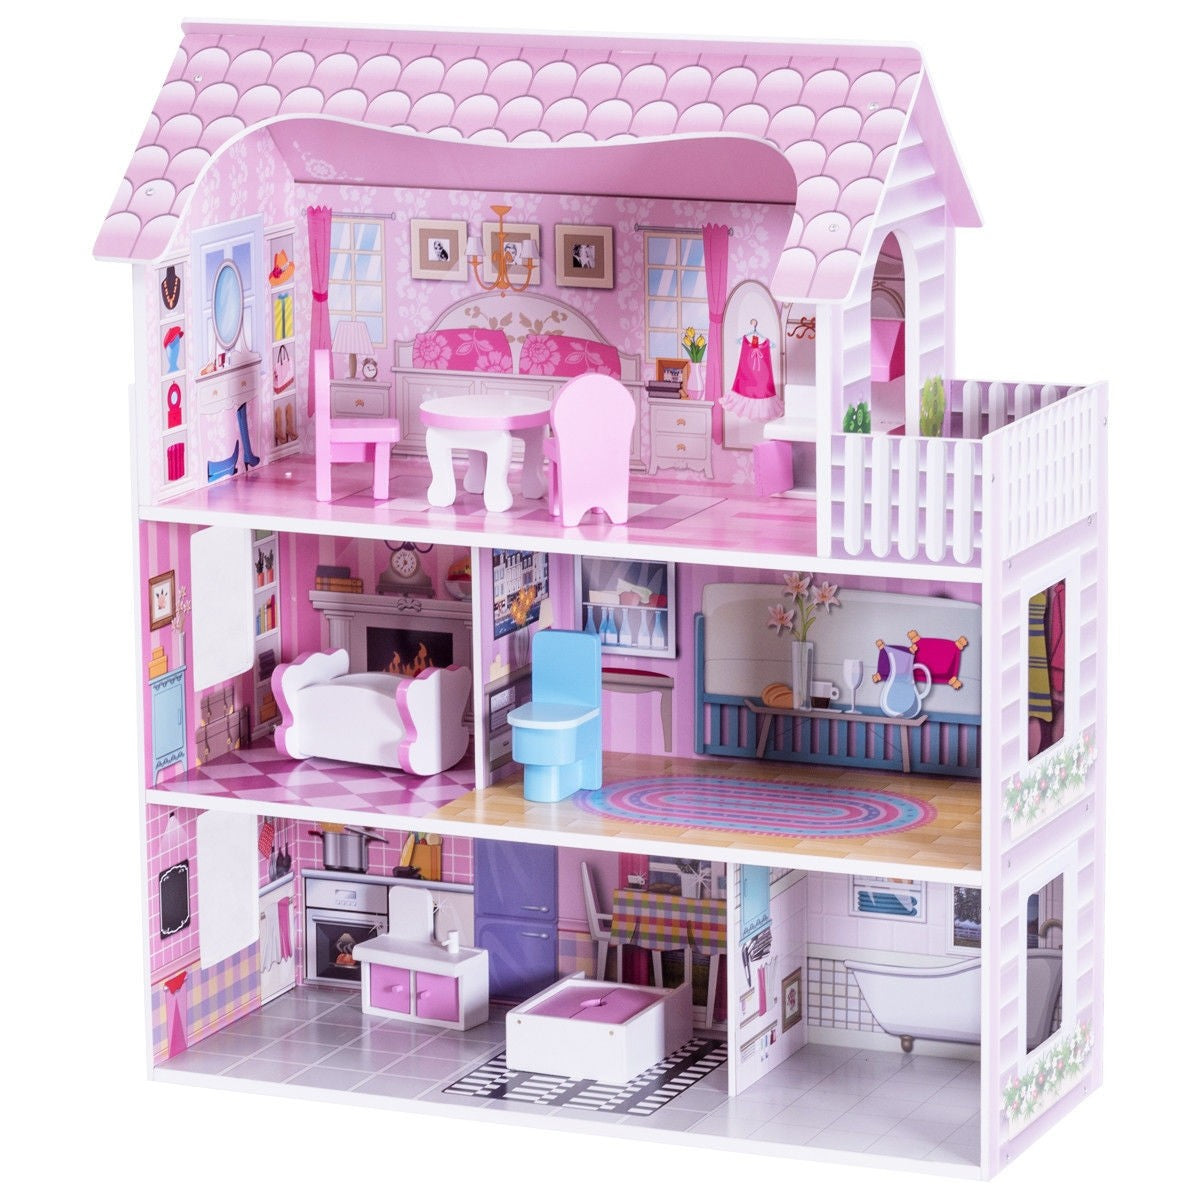 Dollhouse, Toy Family House with 13 pcs Furniture